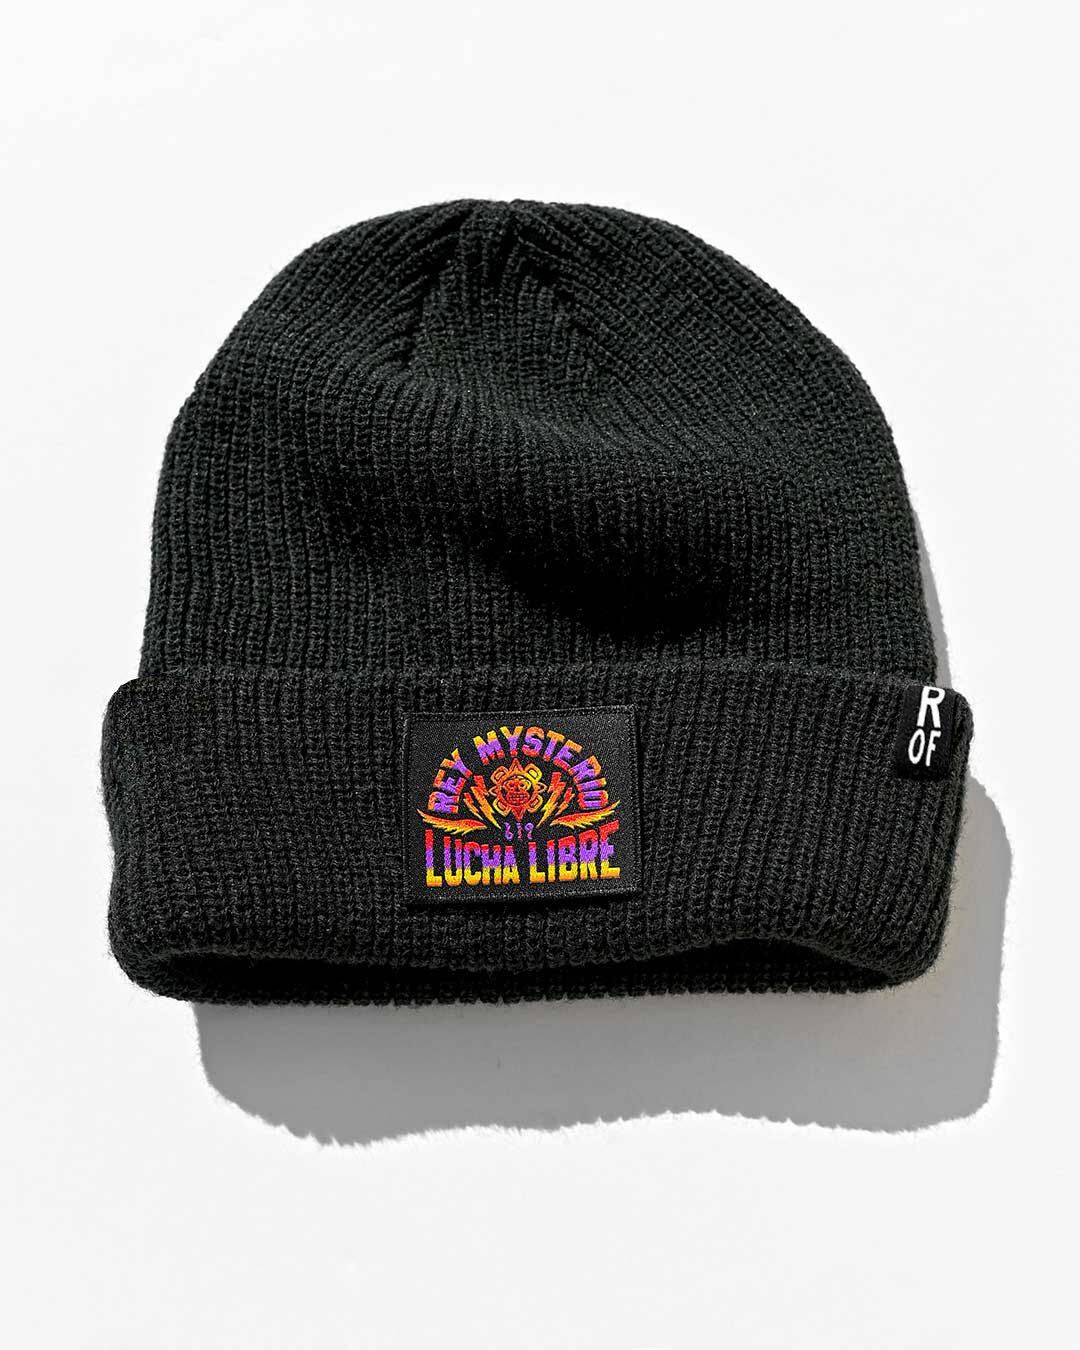 Rey Mysterio Lucha Libre Black Beanie - Roots of Fight Canada